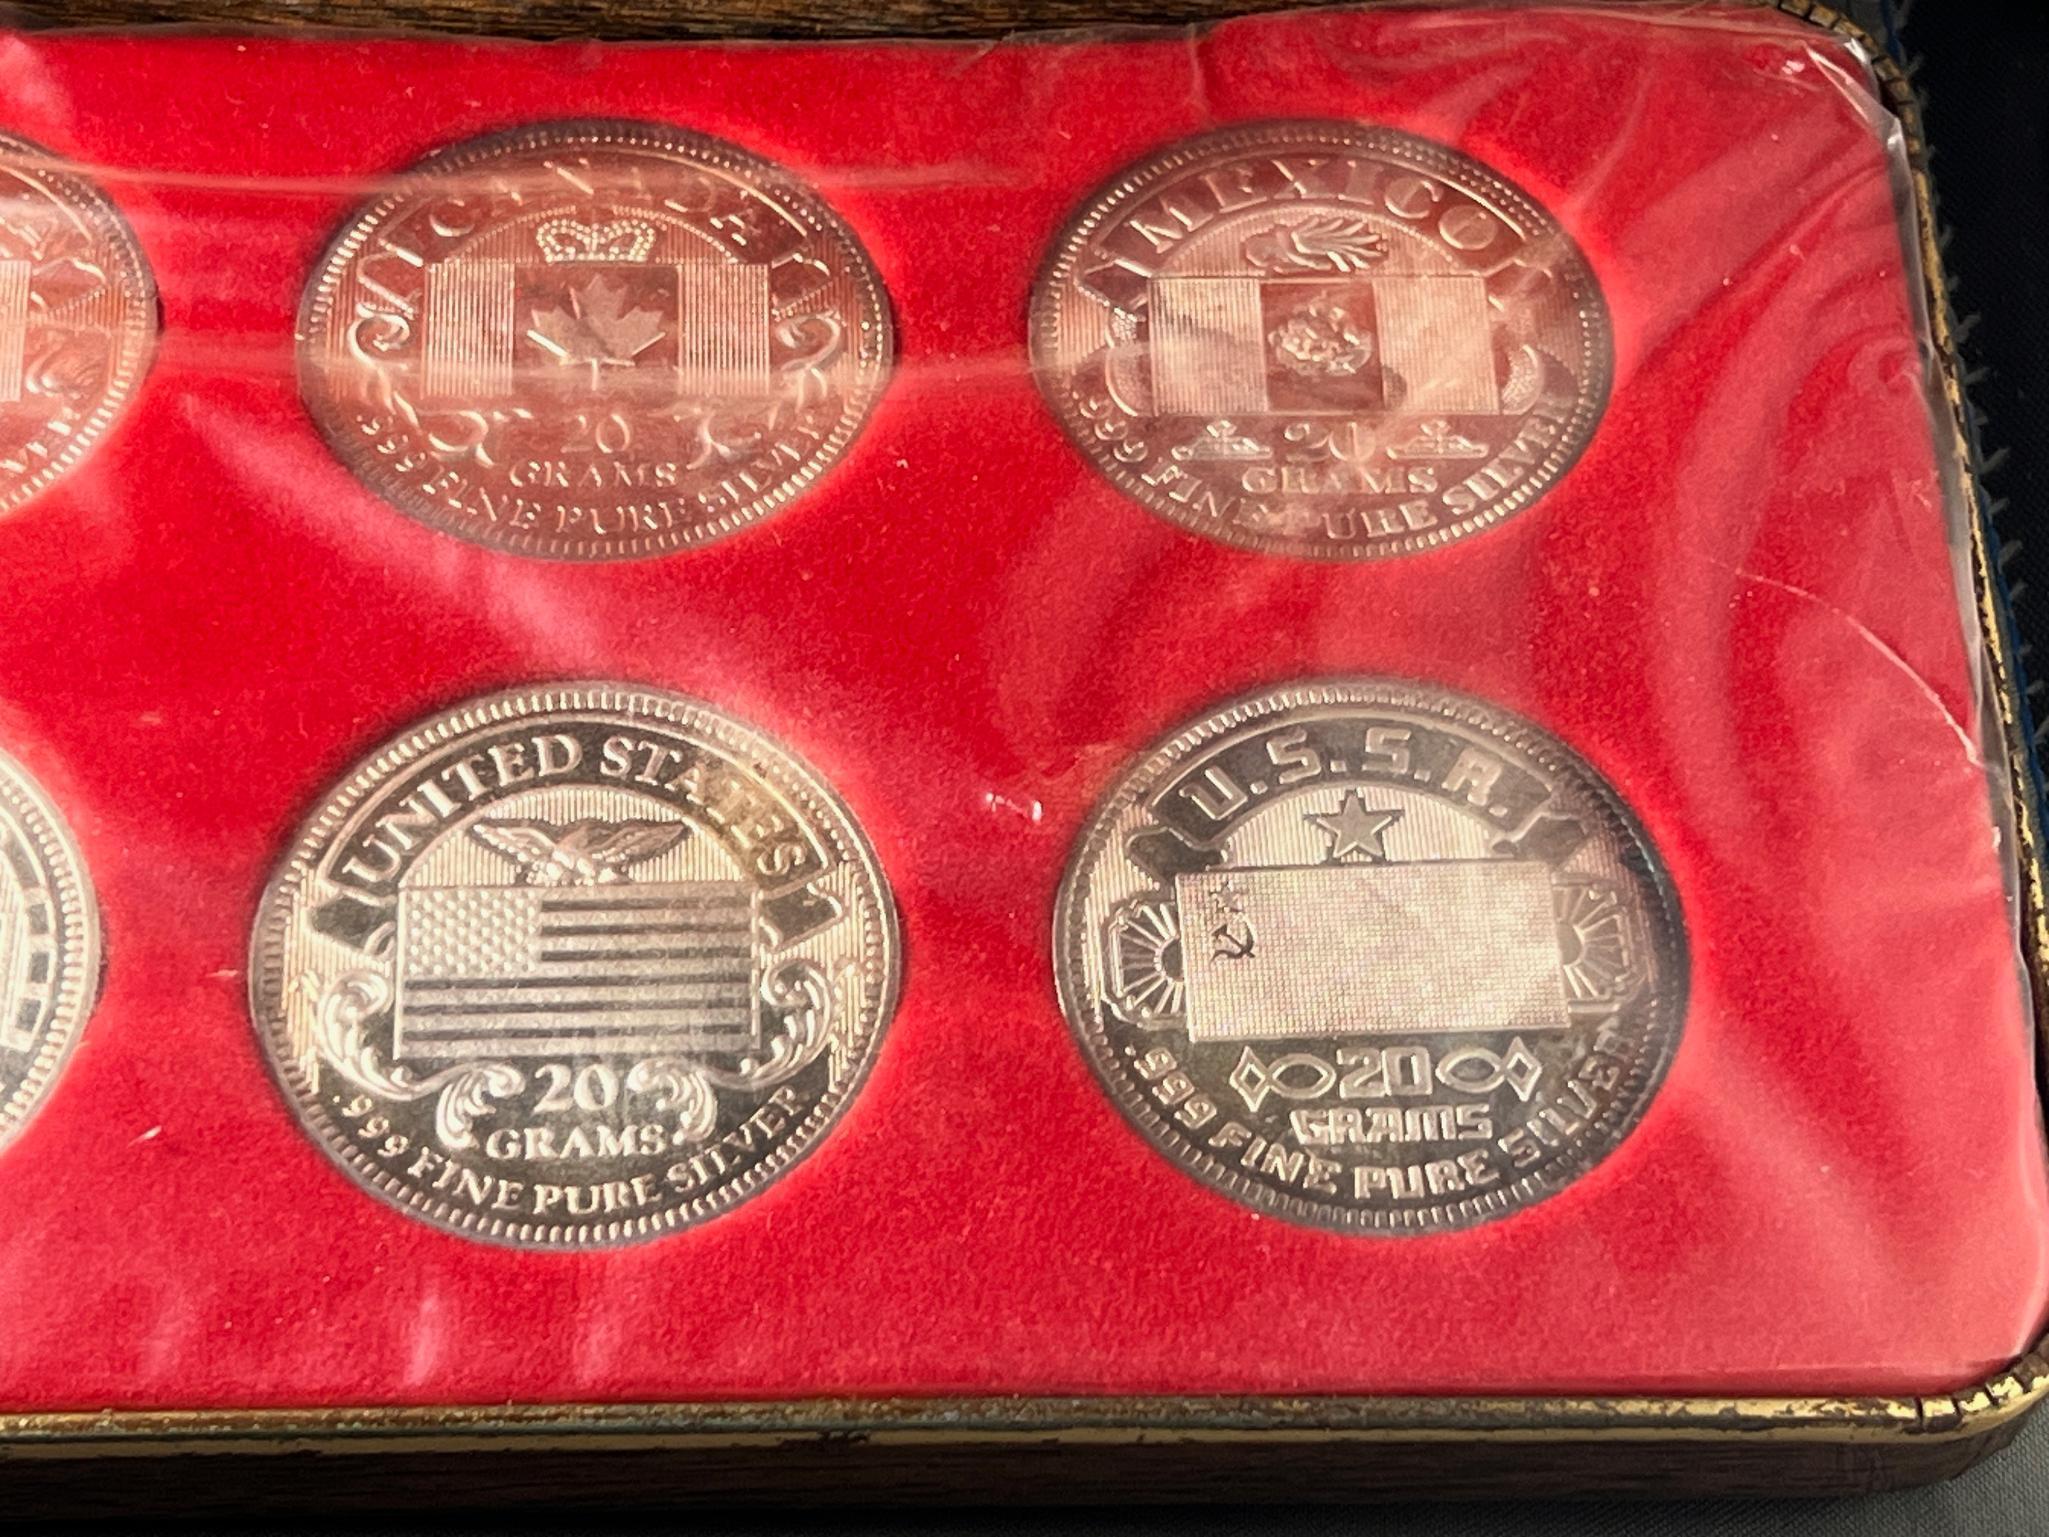 The Silver Mint Nation Set, each coin is 20 grams of .999 pure silver